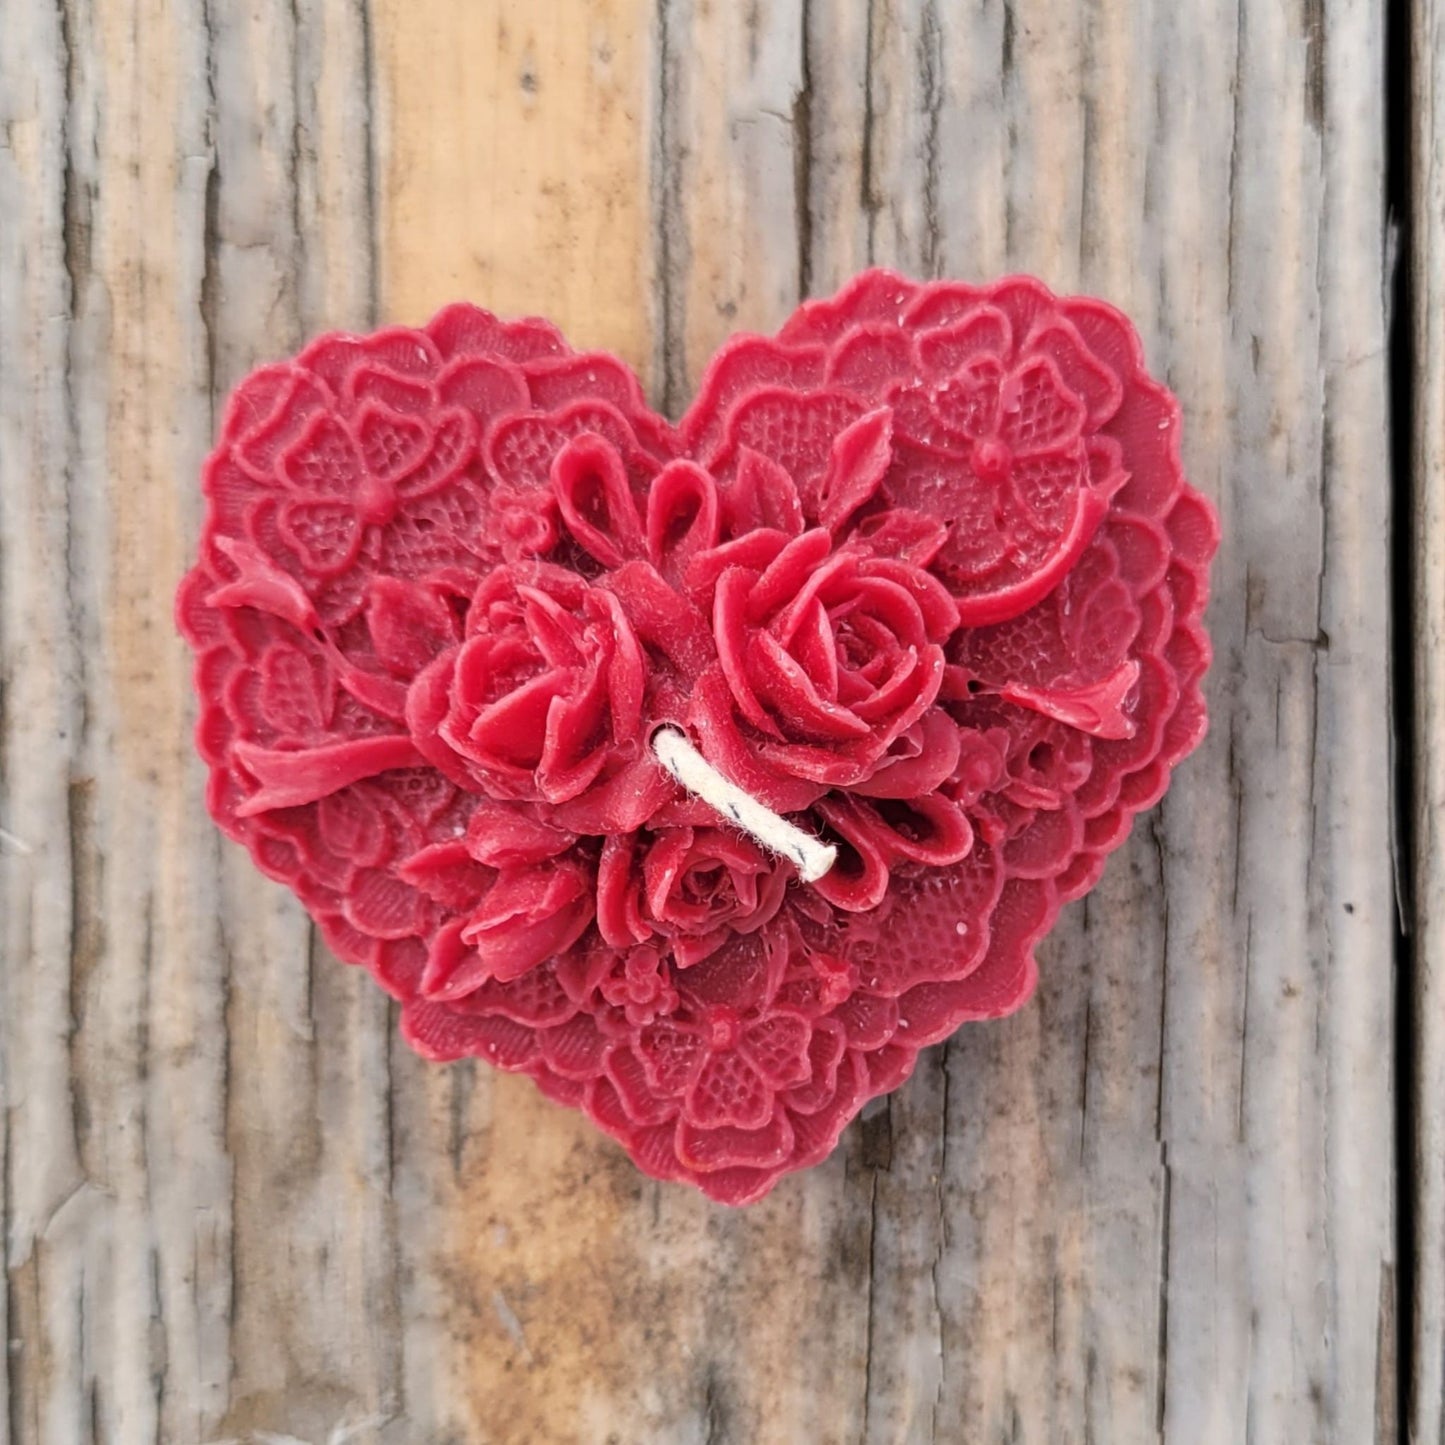 A handmade heart-shaped candle with roses in dark red.